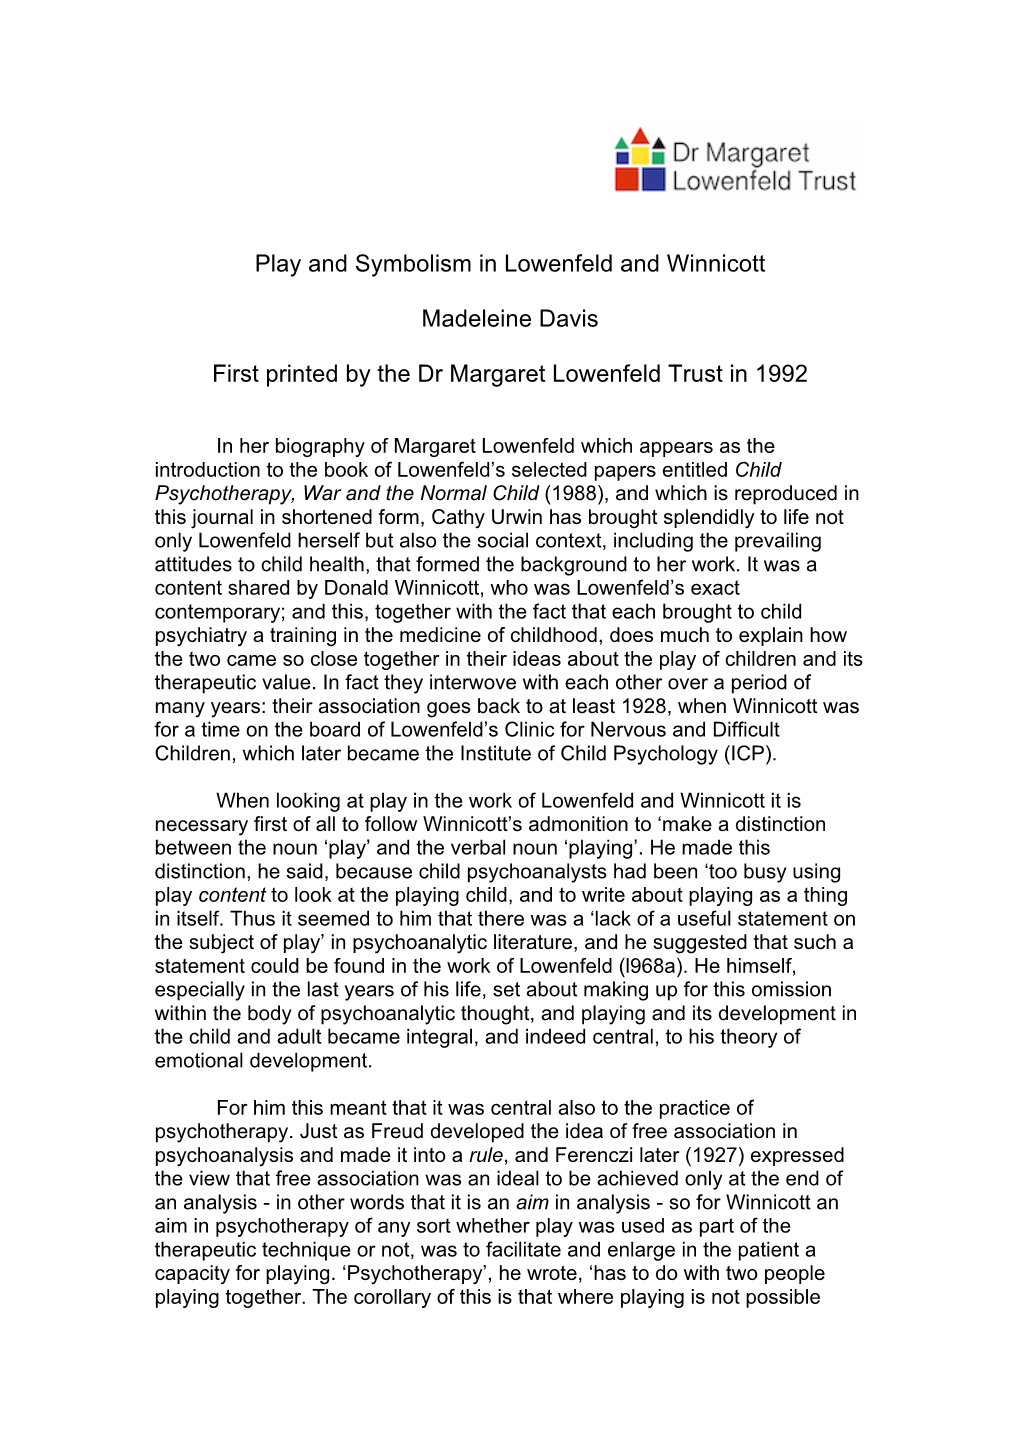 Play and Symbolism in Lowenfeld and Winnicott Madeleine Davis First Printed by the Dr Margaret Lowenfeld Trust in 1992